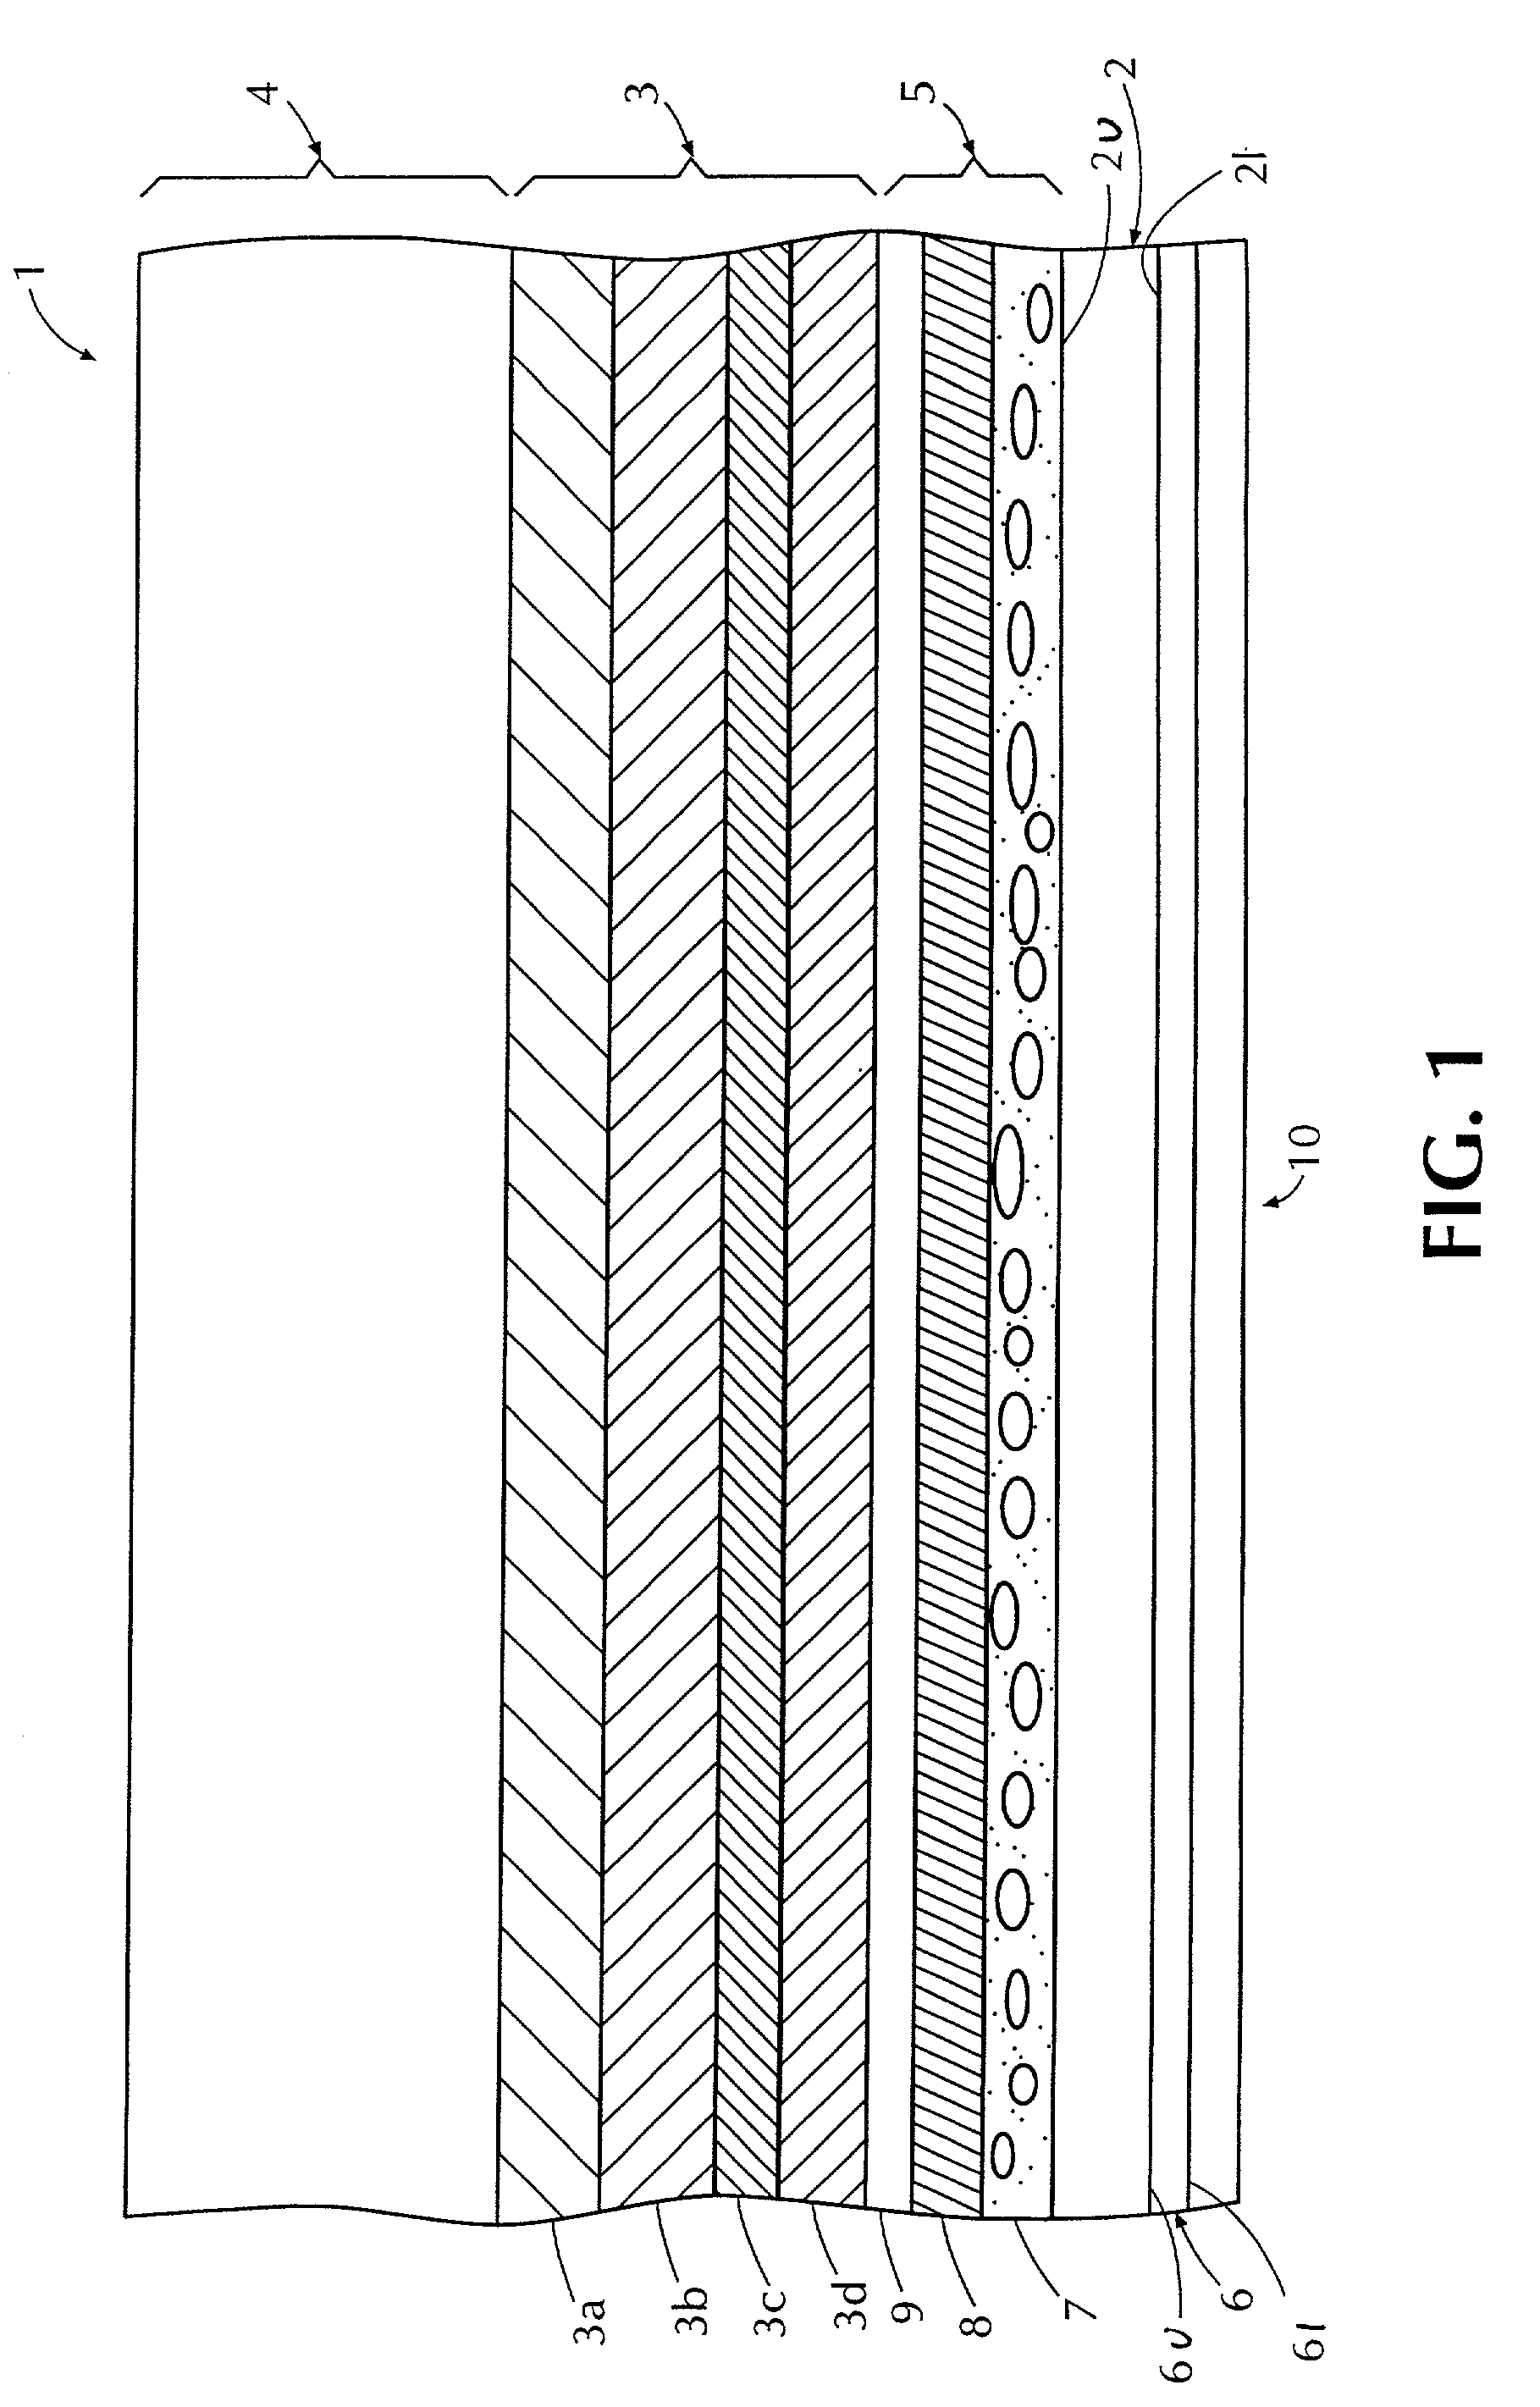 Latex-based barrier for surface coverings